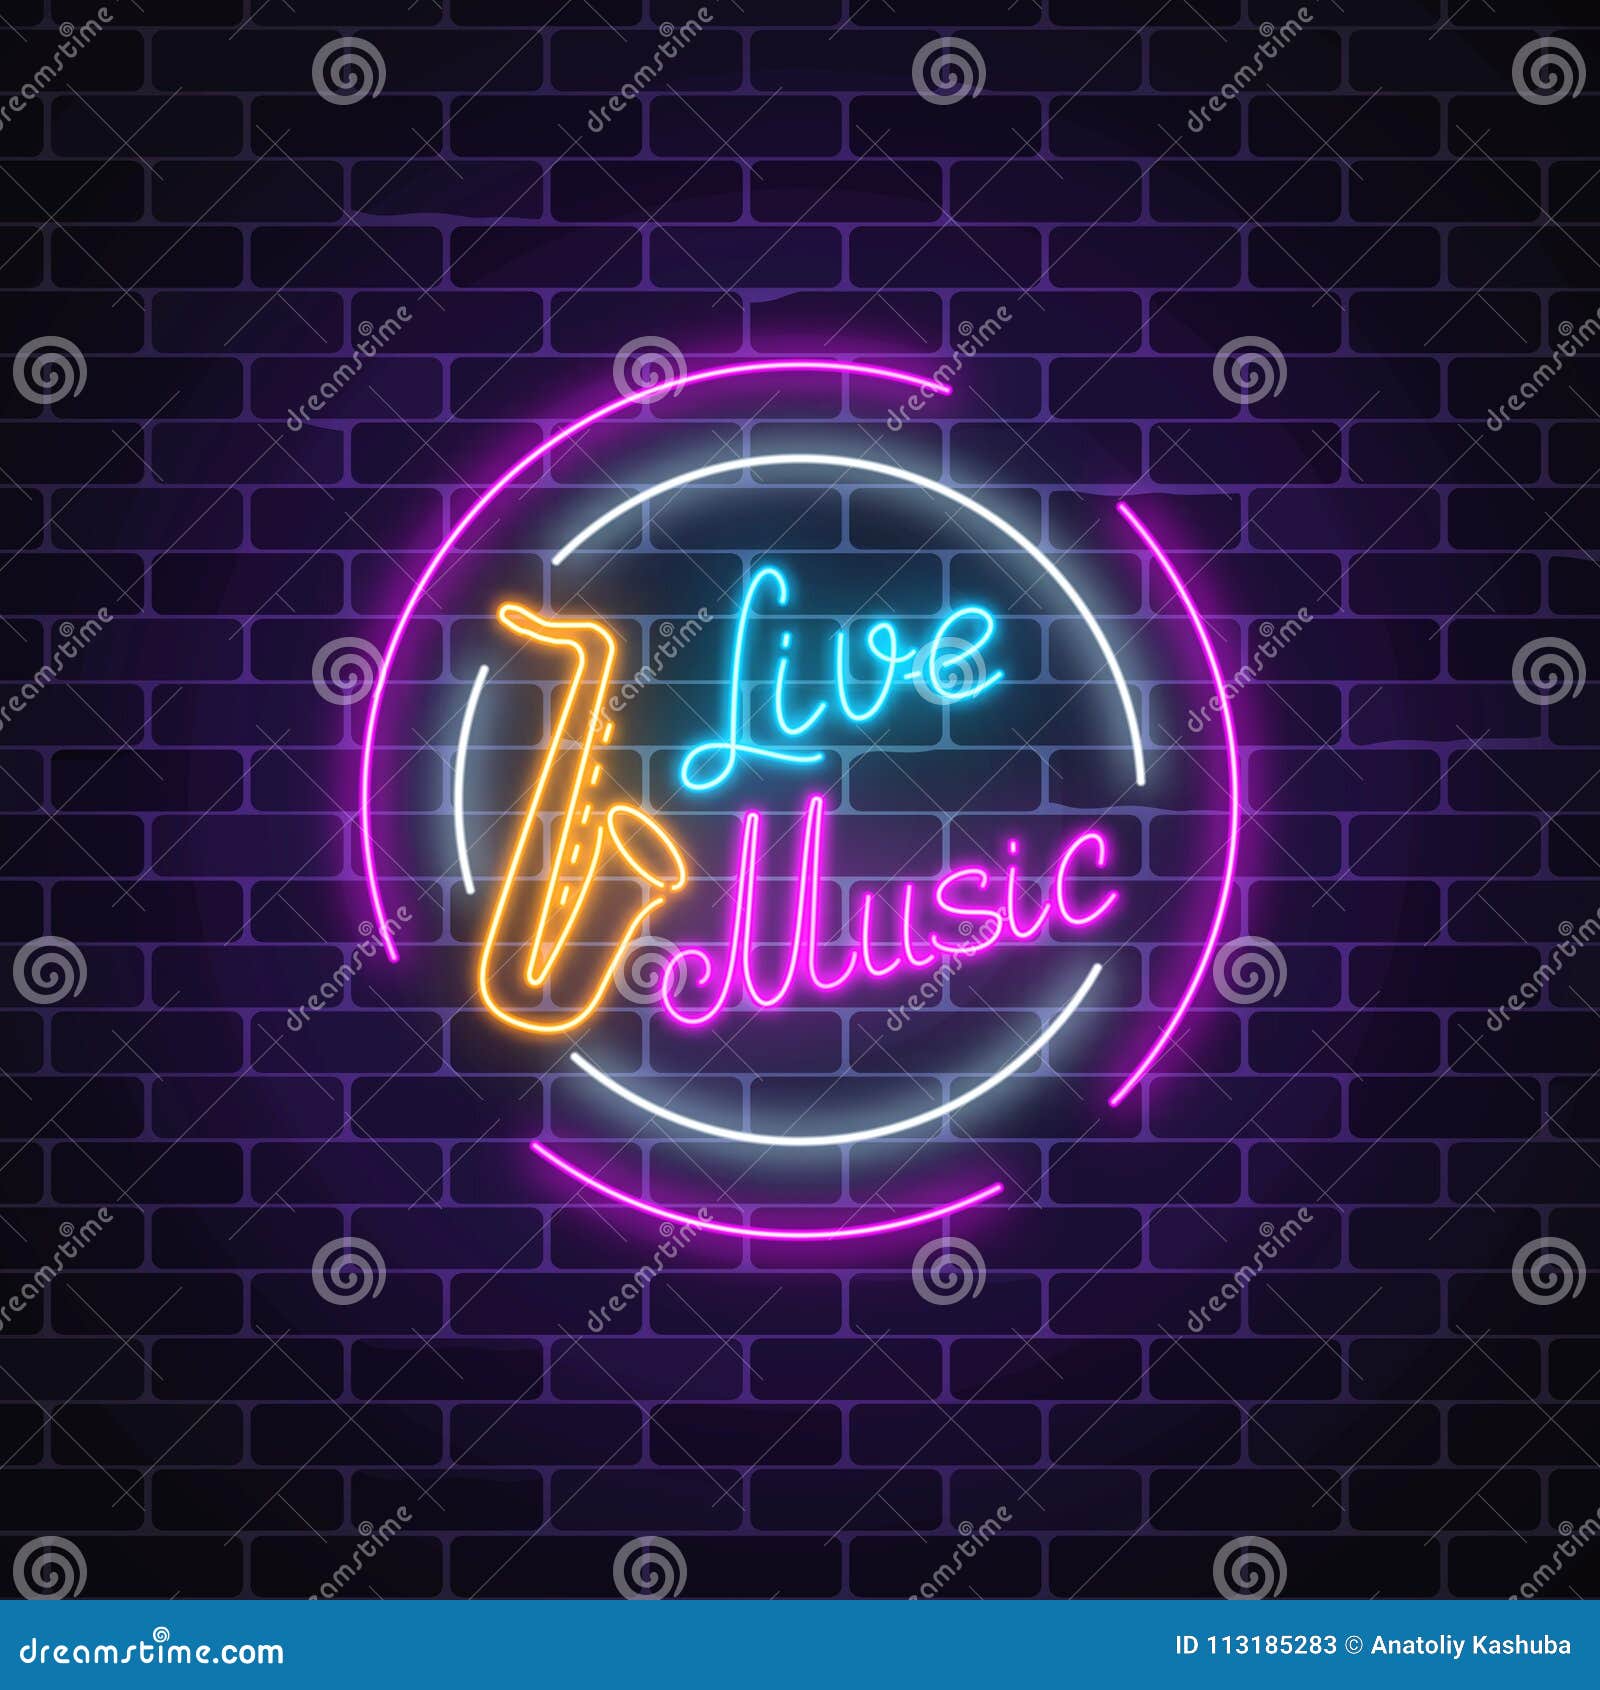 Neon Sign Of Bar With Live Music Advertising Glowing Signboard Of Sound Cafe With Saxophone Symbol Stock Vector Illustration Of Entertainment Background 113185283